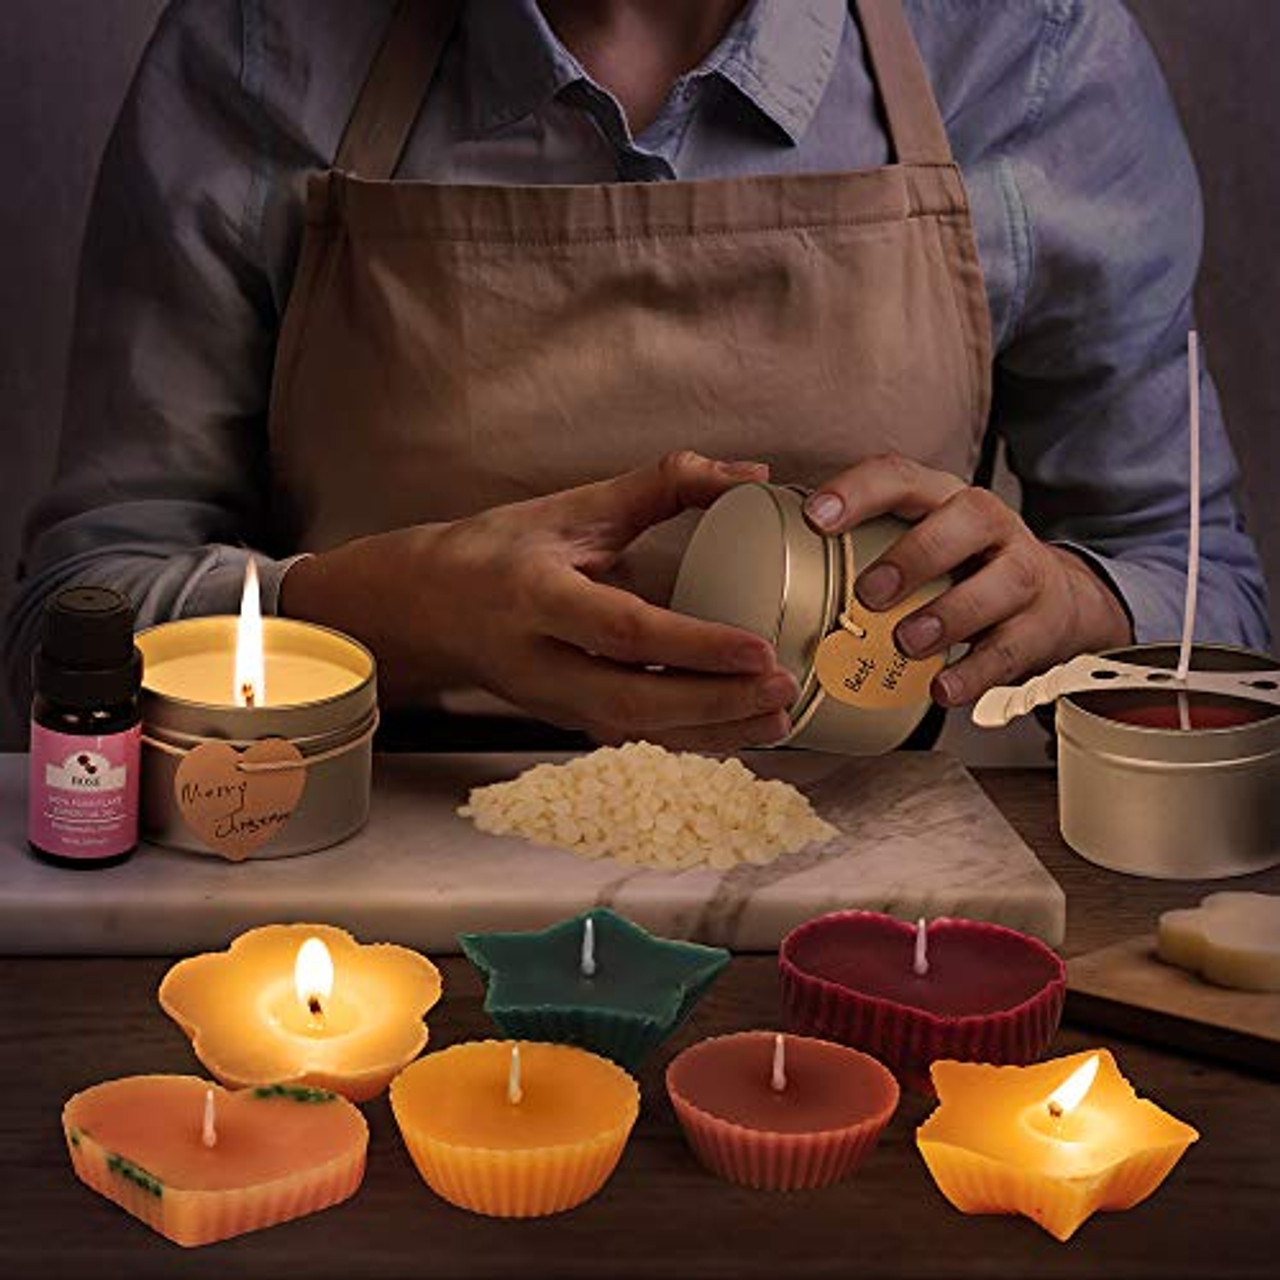 Diy Candle Making Kit Supplies, Soy Wax Diy Candle Craft Tools, Include  Candle Making Pouring Pot, Thermometer, Candle Wick, Colorful Wax Block,  Essential Oil, Wick Sticker, Hole Candle Wick Holder, Natural Soy